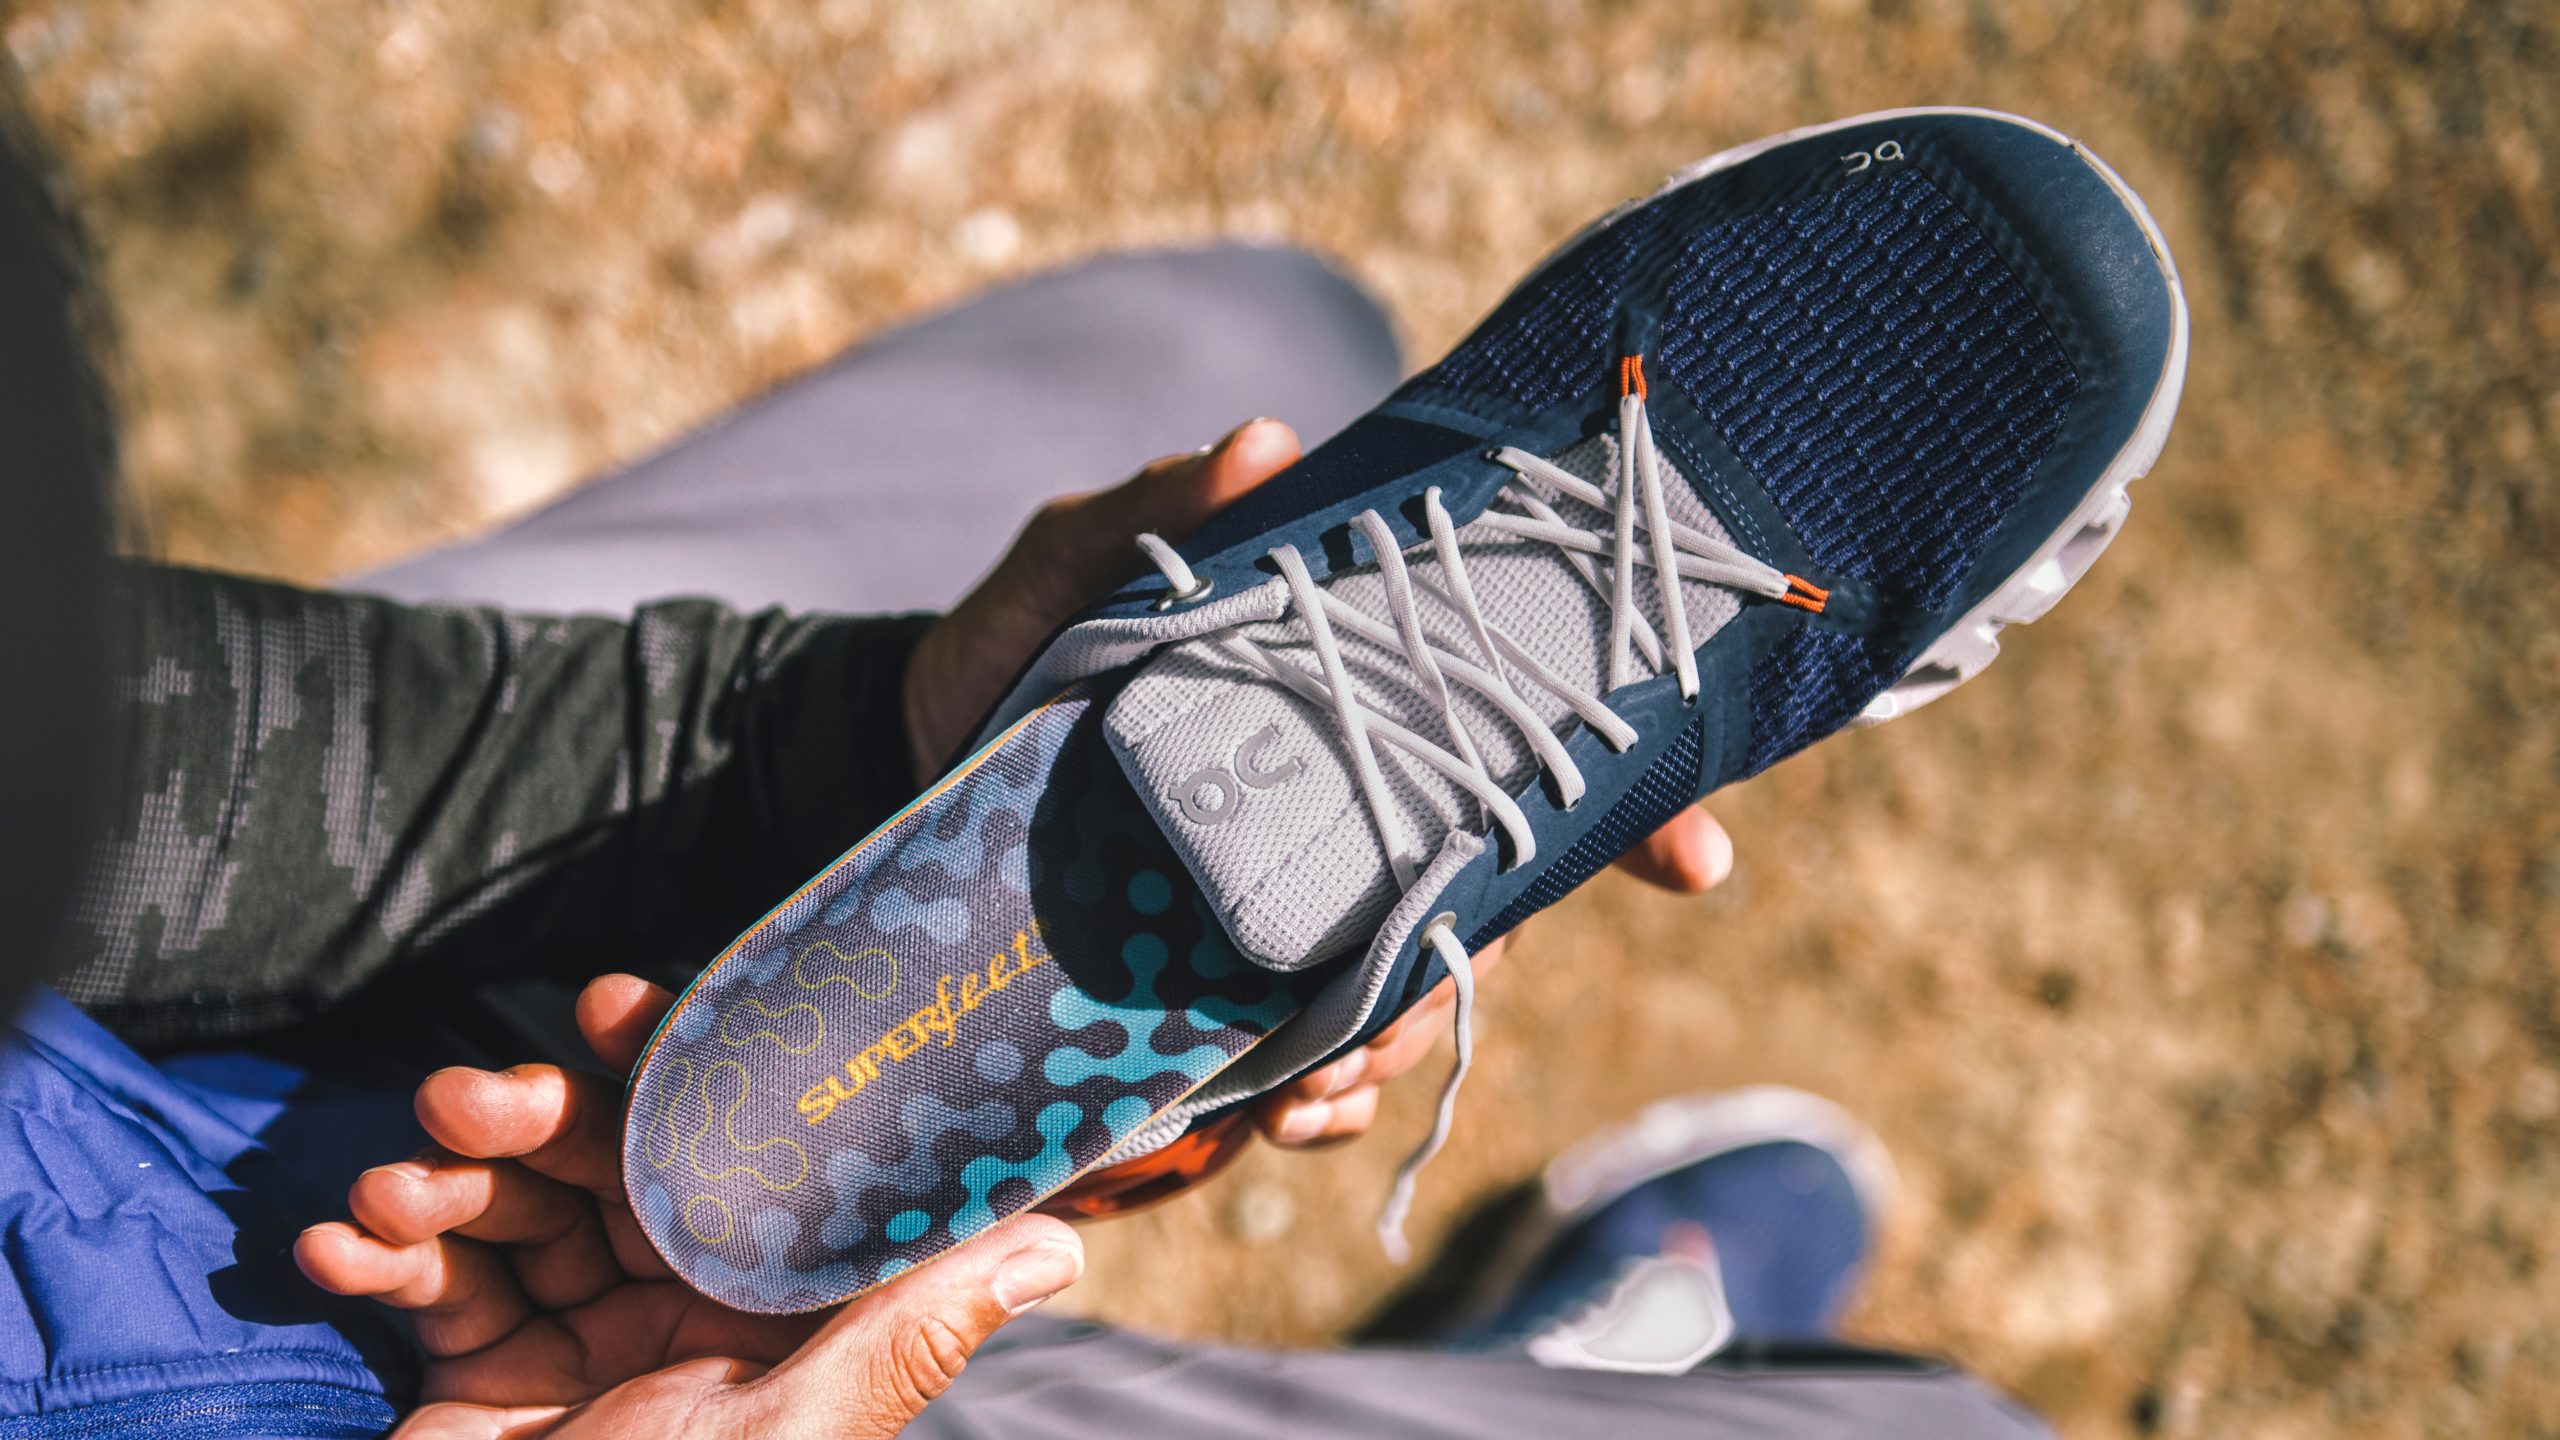 Superfeet ADAPT Run insoles are lightly-structured cushioned running orthotics made to feel like part of your running shoes